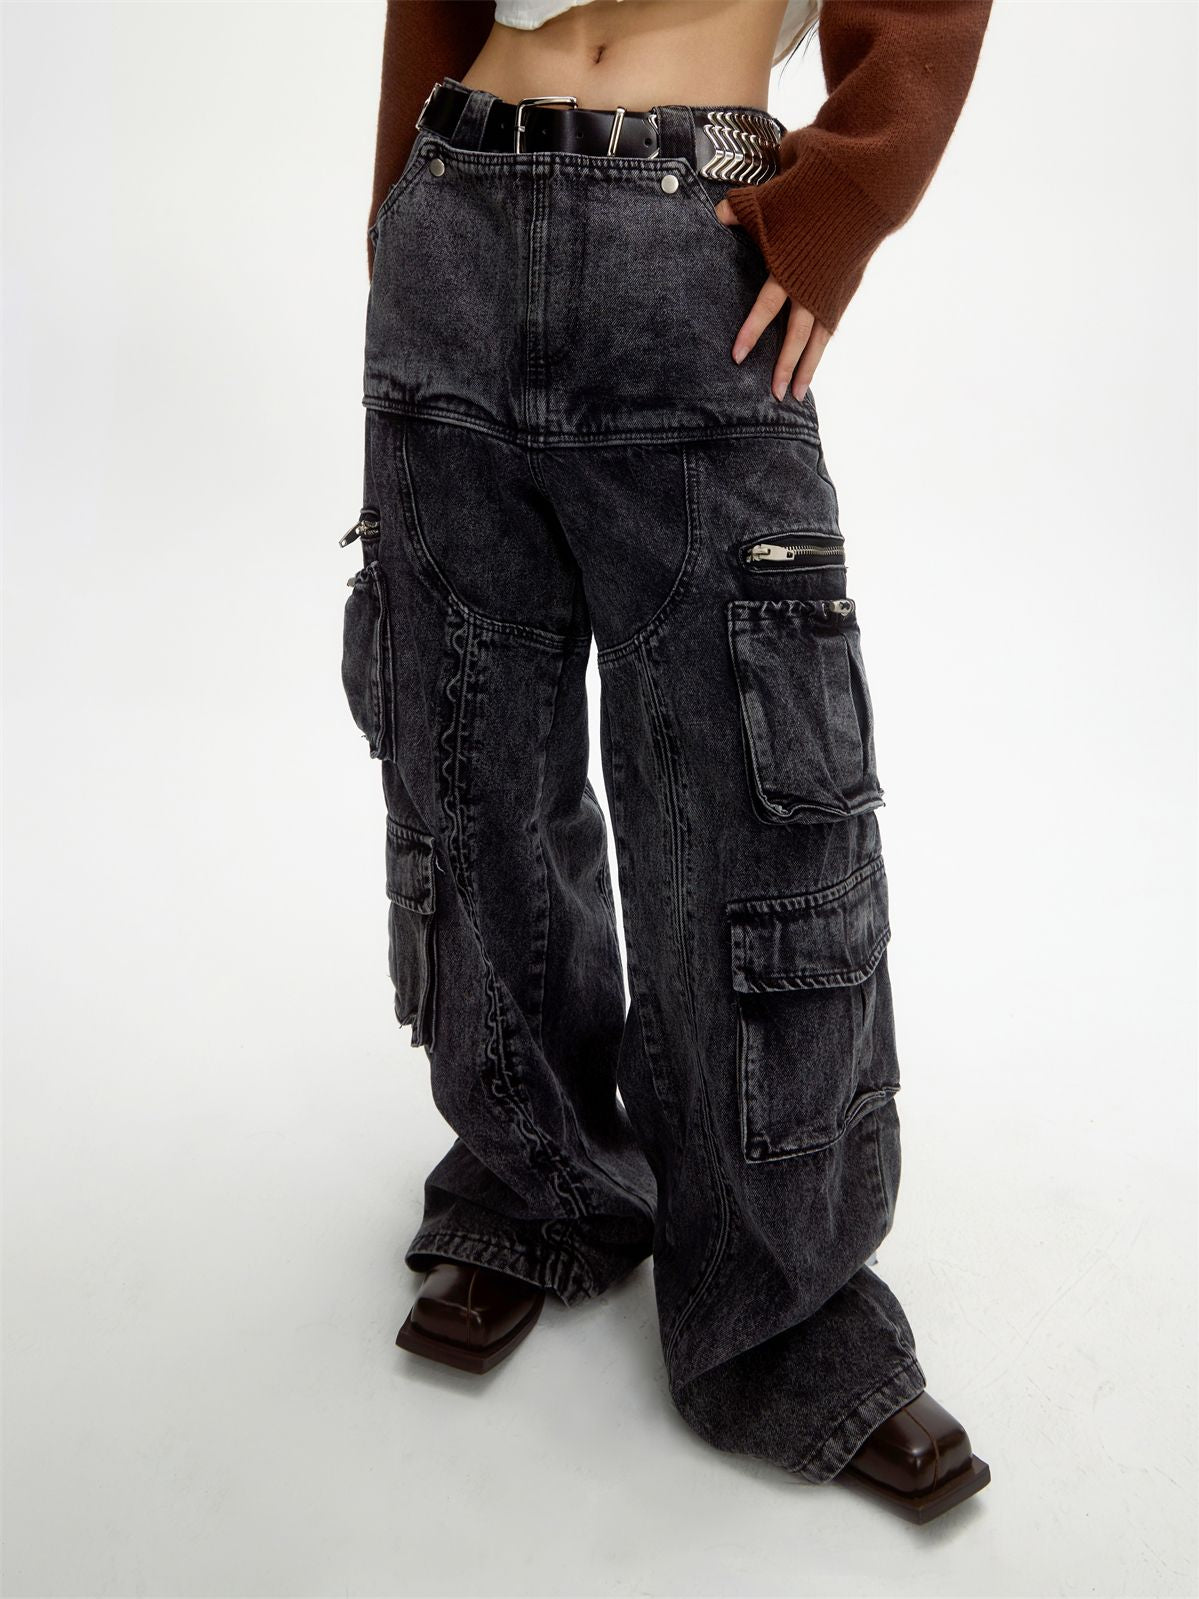 BALENCIAGAPEOPLESTYLE  Dirty Jeans カーゴパンツジーンズ